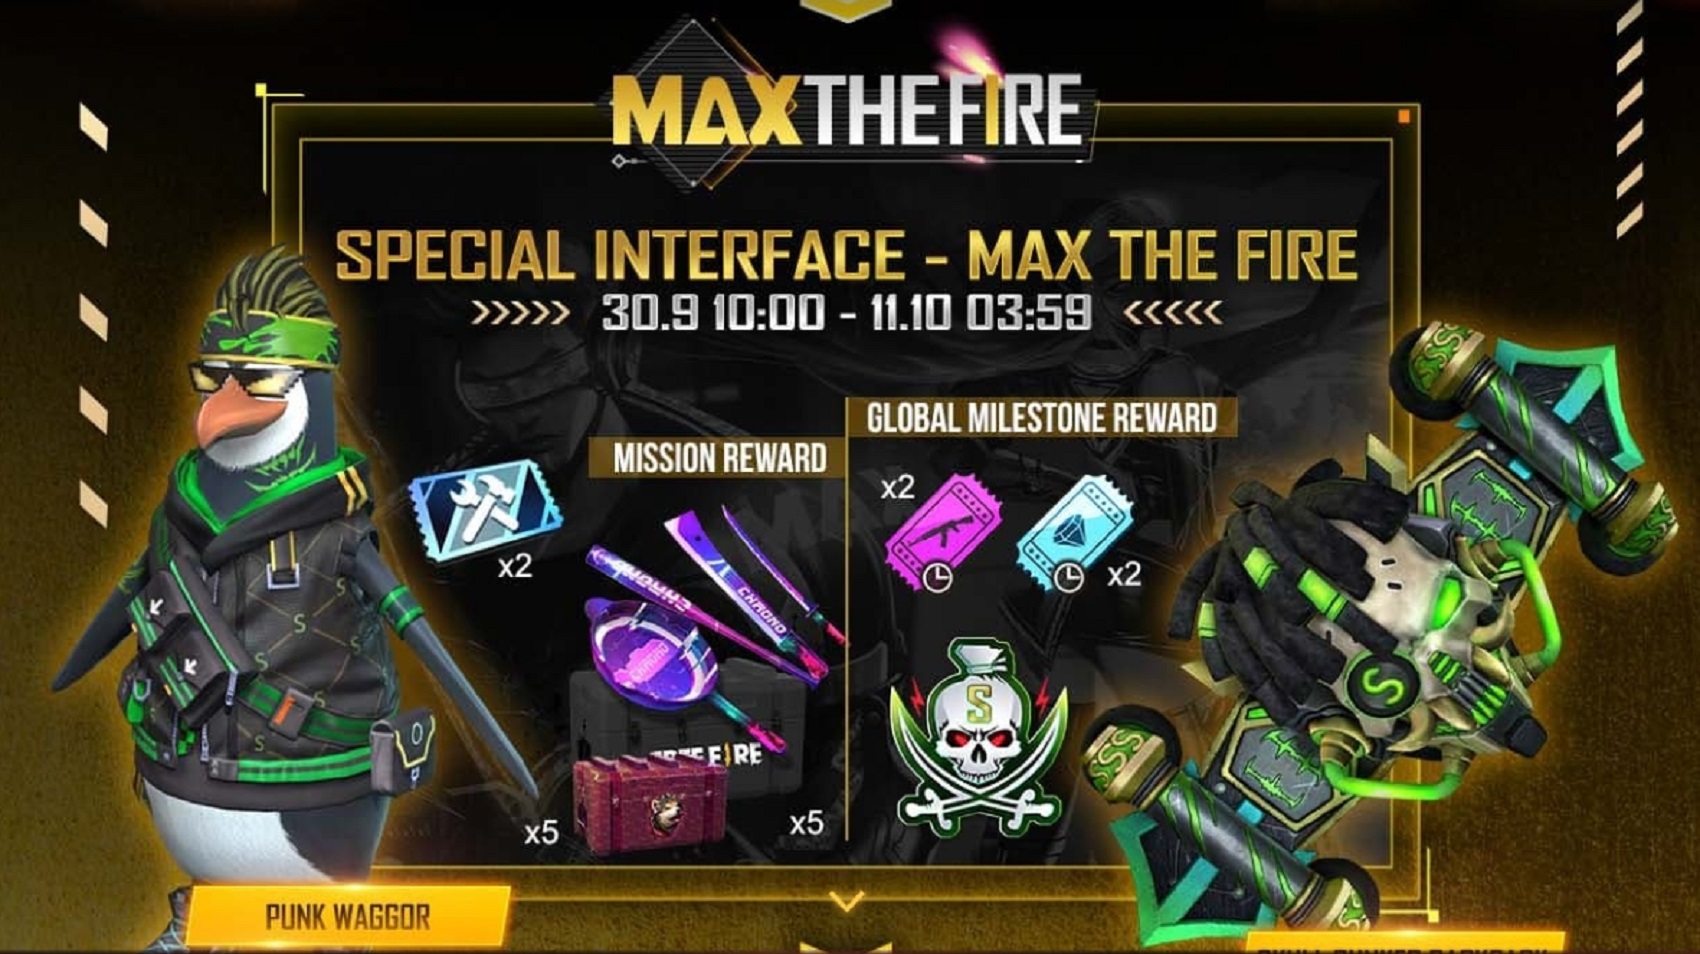 Daftar Hadiah Max The Fire Event Free Fire (FF)